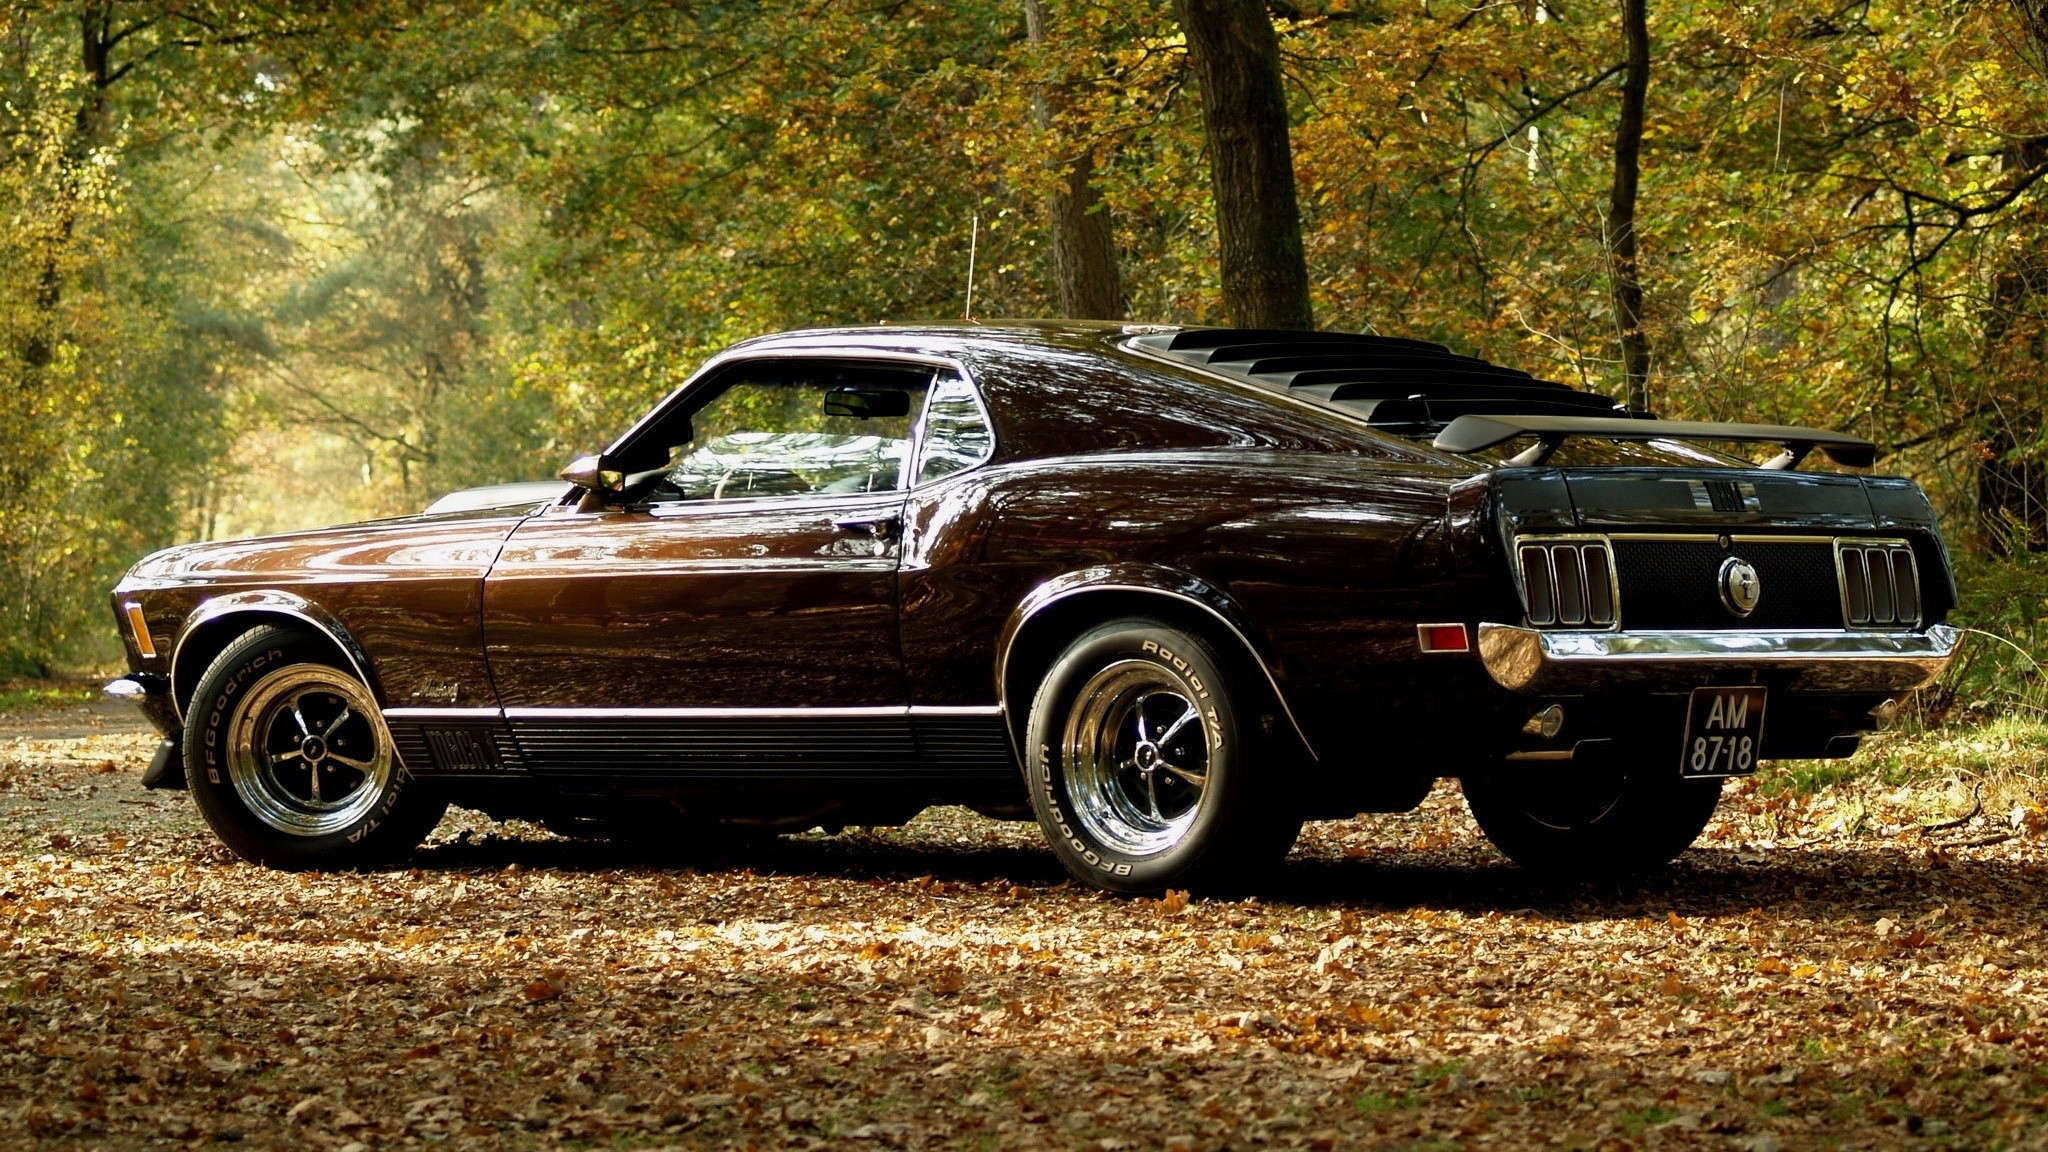 vehicles, Cars, Ford, Mustang, Boss, Spoiler, Wings, Wheels, Shine, Muscle, Old, Retro, Classic, Landscapes, Leaves, Trees, Forest, Autumn, Fall, Seasons, Roads, Street Wallpaper